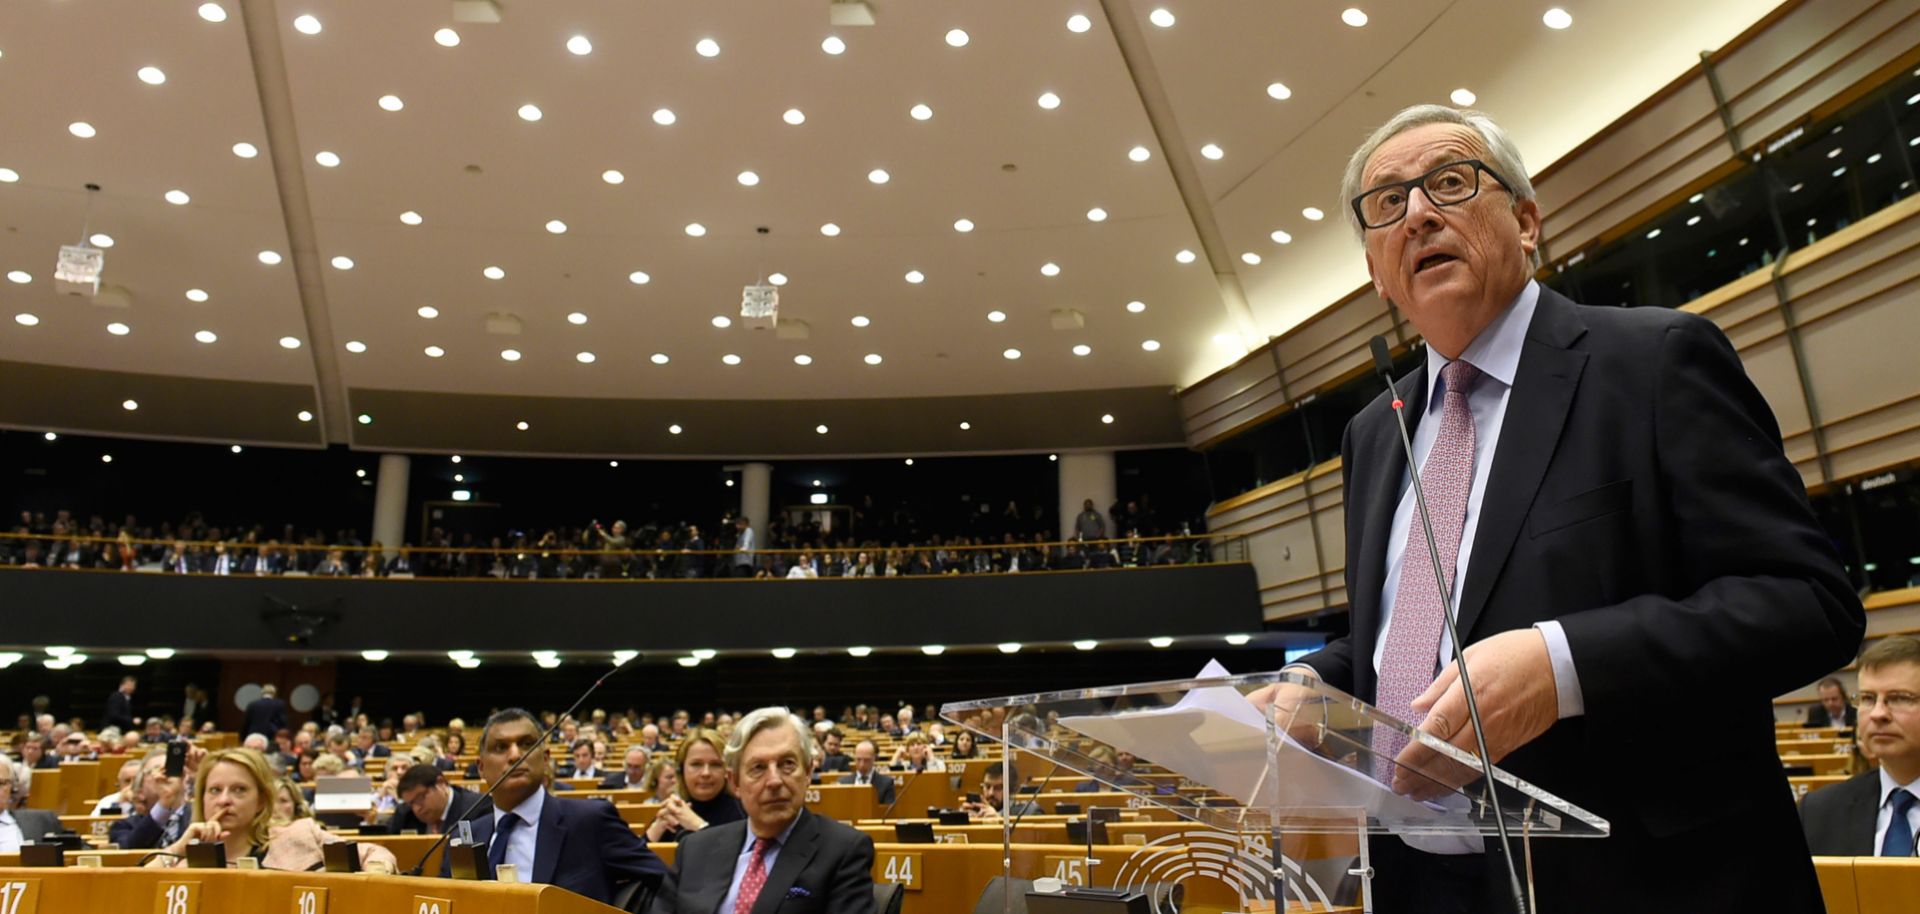 EU Commission President Jean-Claude Juncker presented a report on the European Union's future March 1 in Brussels. The report outlines five different scenarios, including the possibility that member states could regain domestic policymaking authority.